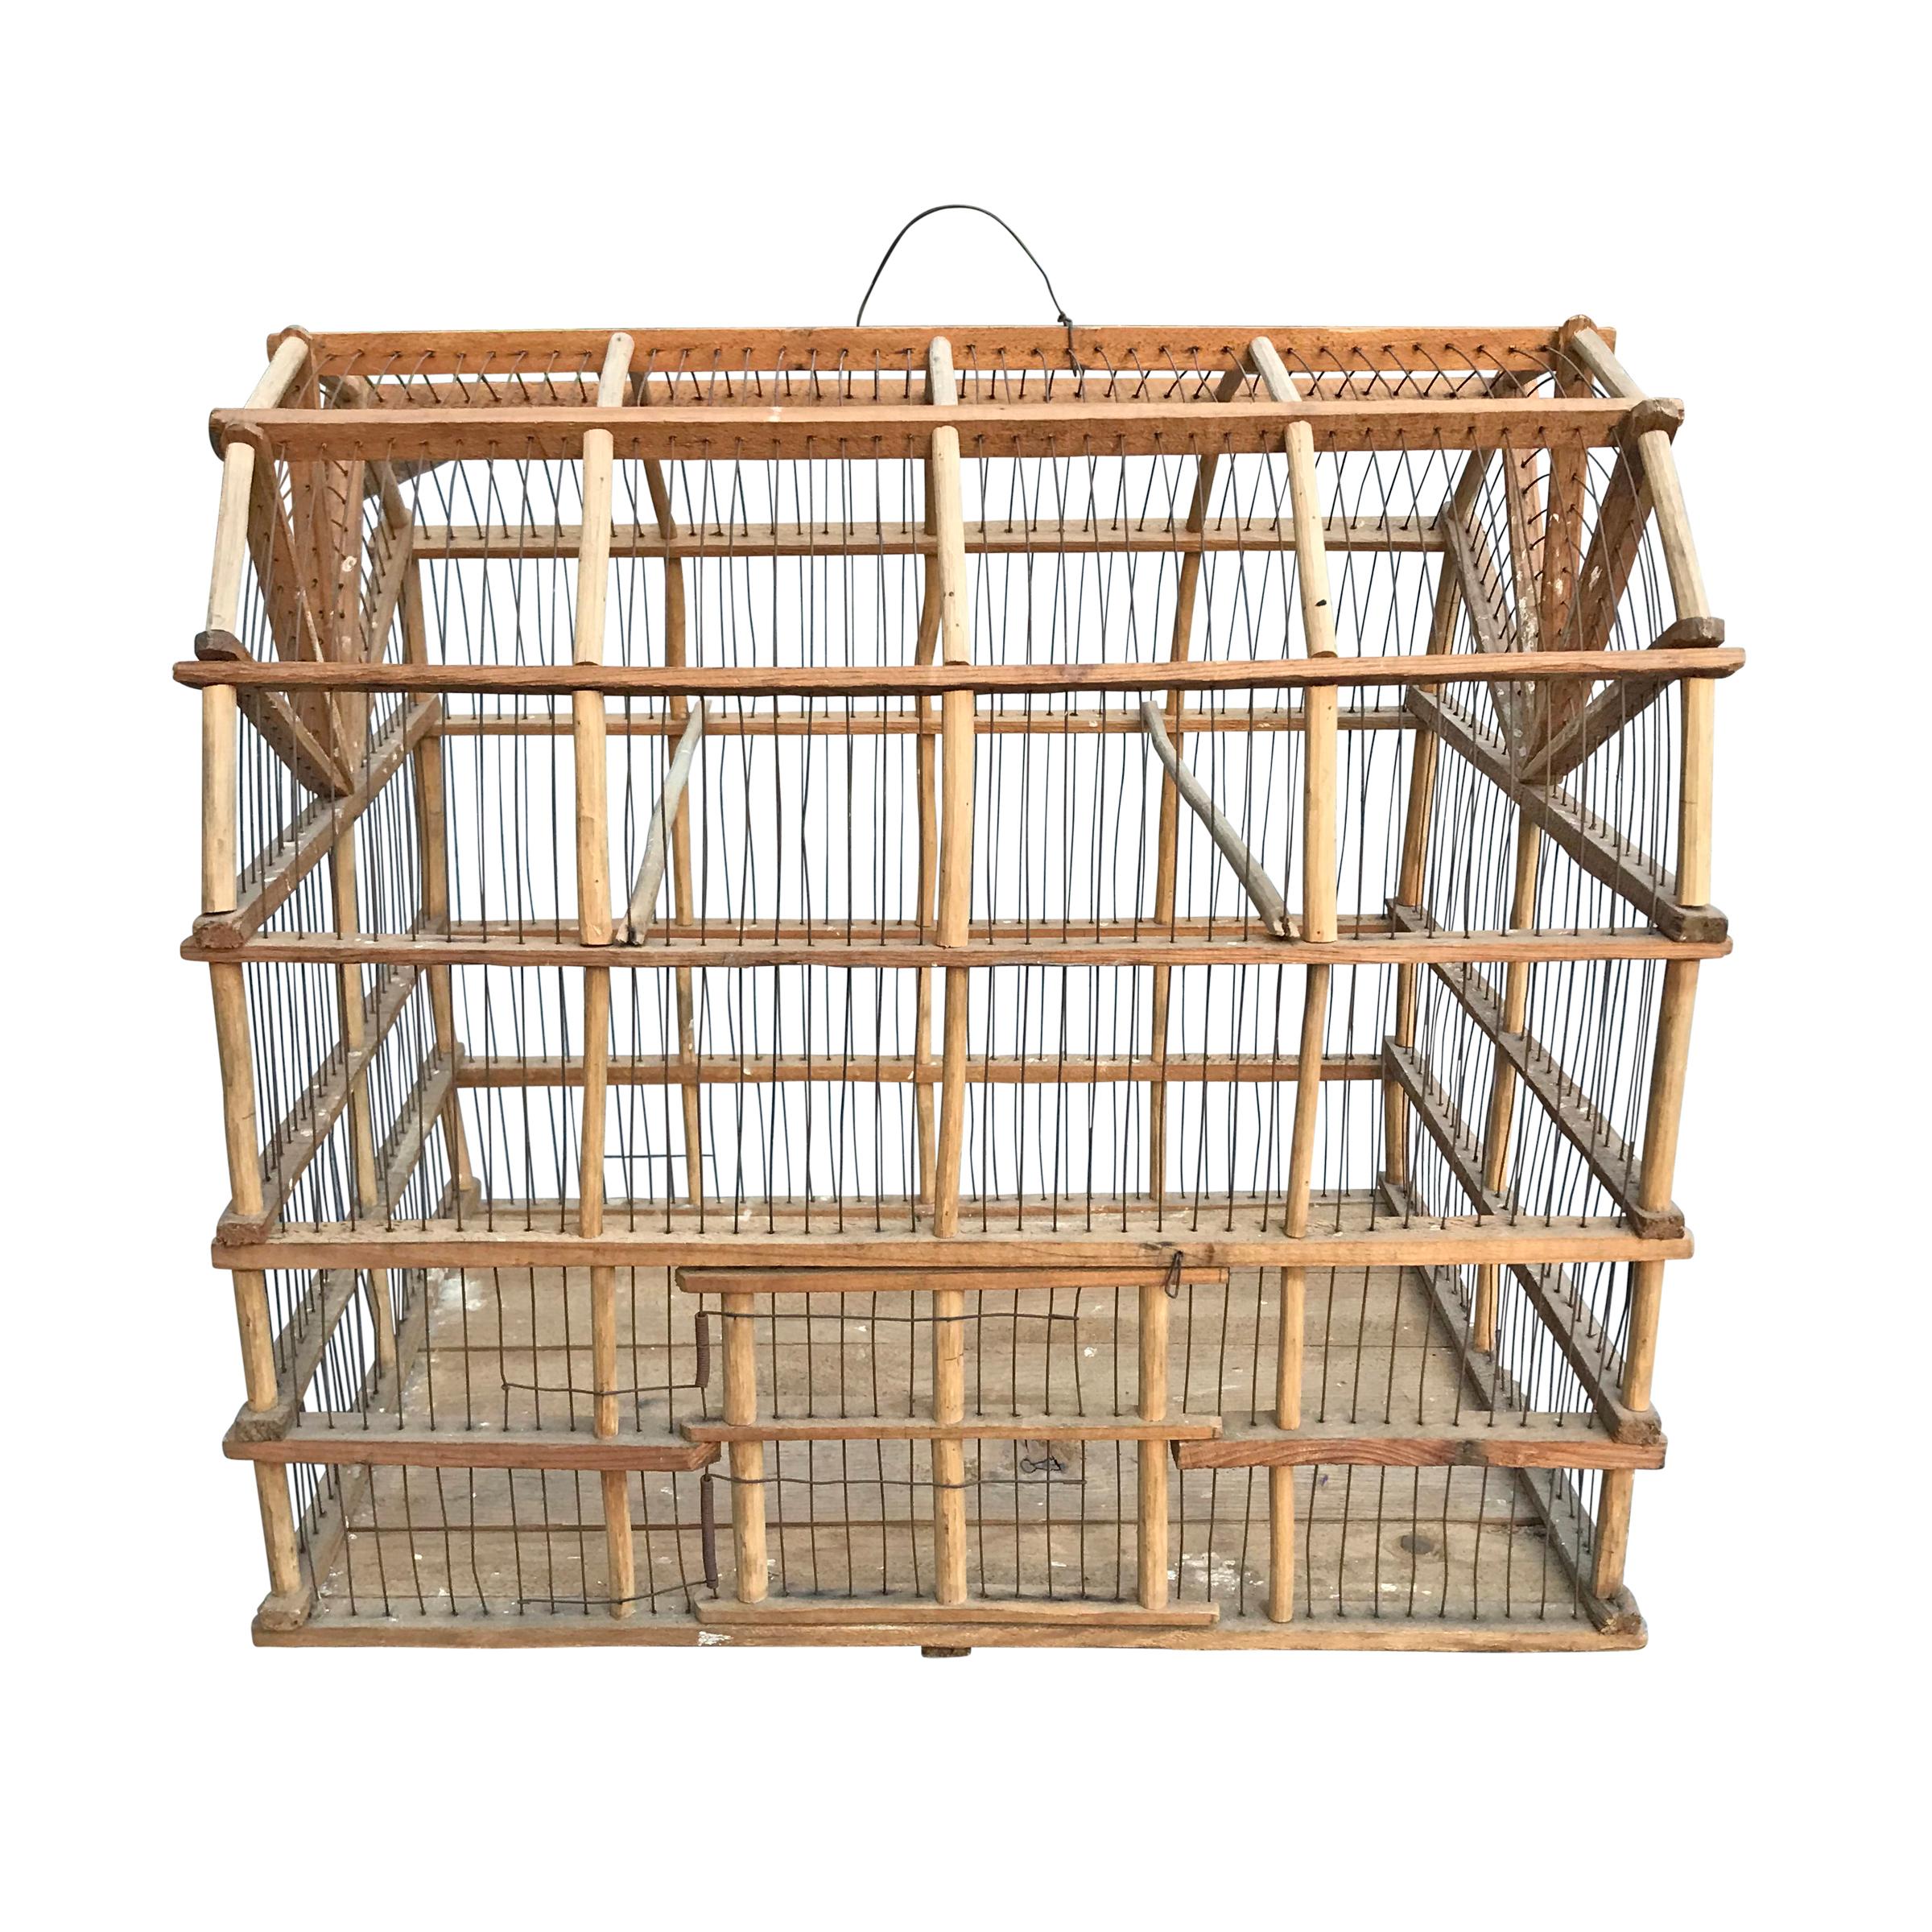 A wonderfully sculptural early 20th century American Folk Art Dutch colonial barn birdcage of timber frame construction with a tension mounted door, plank-pine flooring, and thin wire cage and handle.